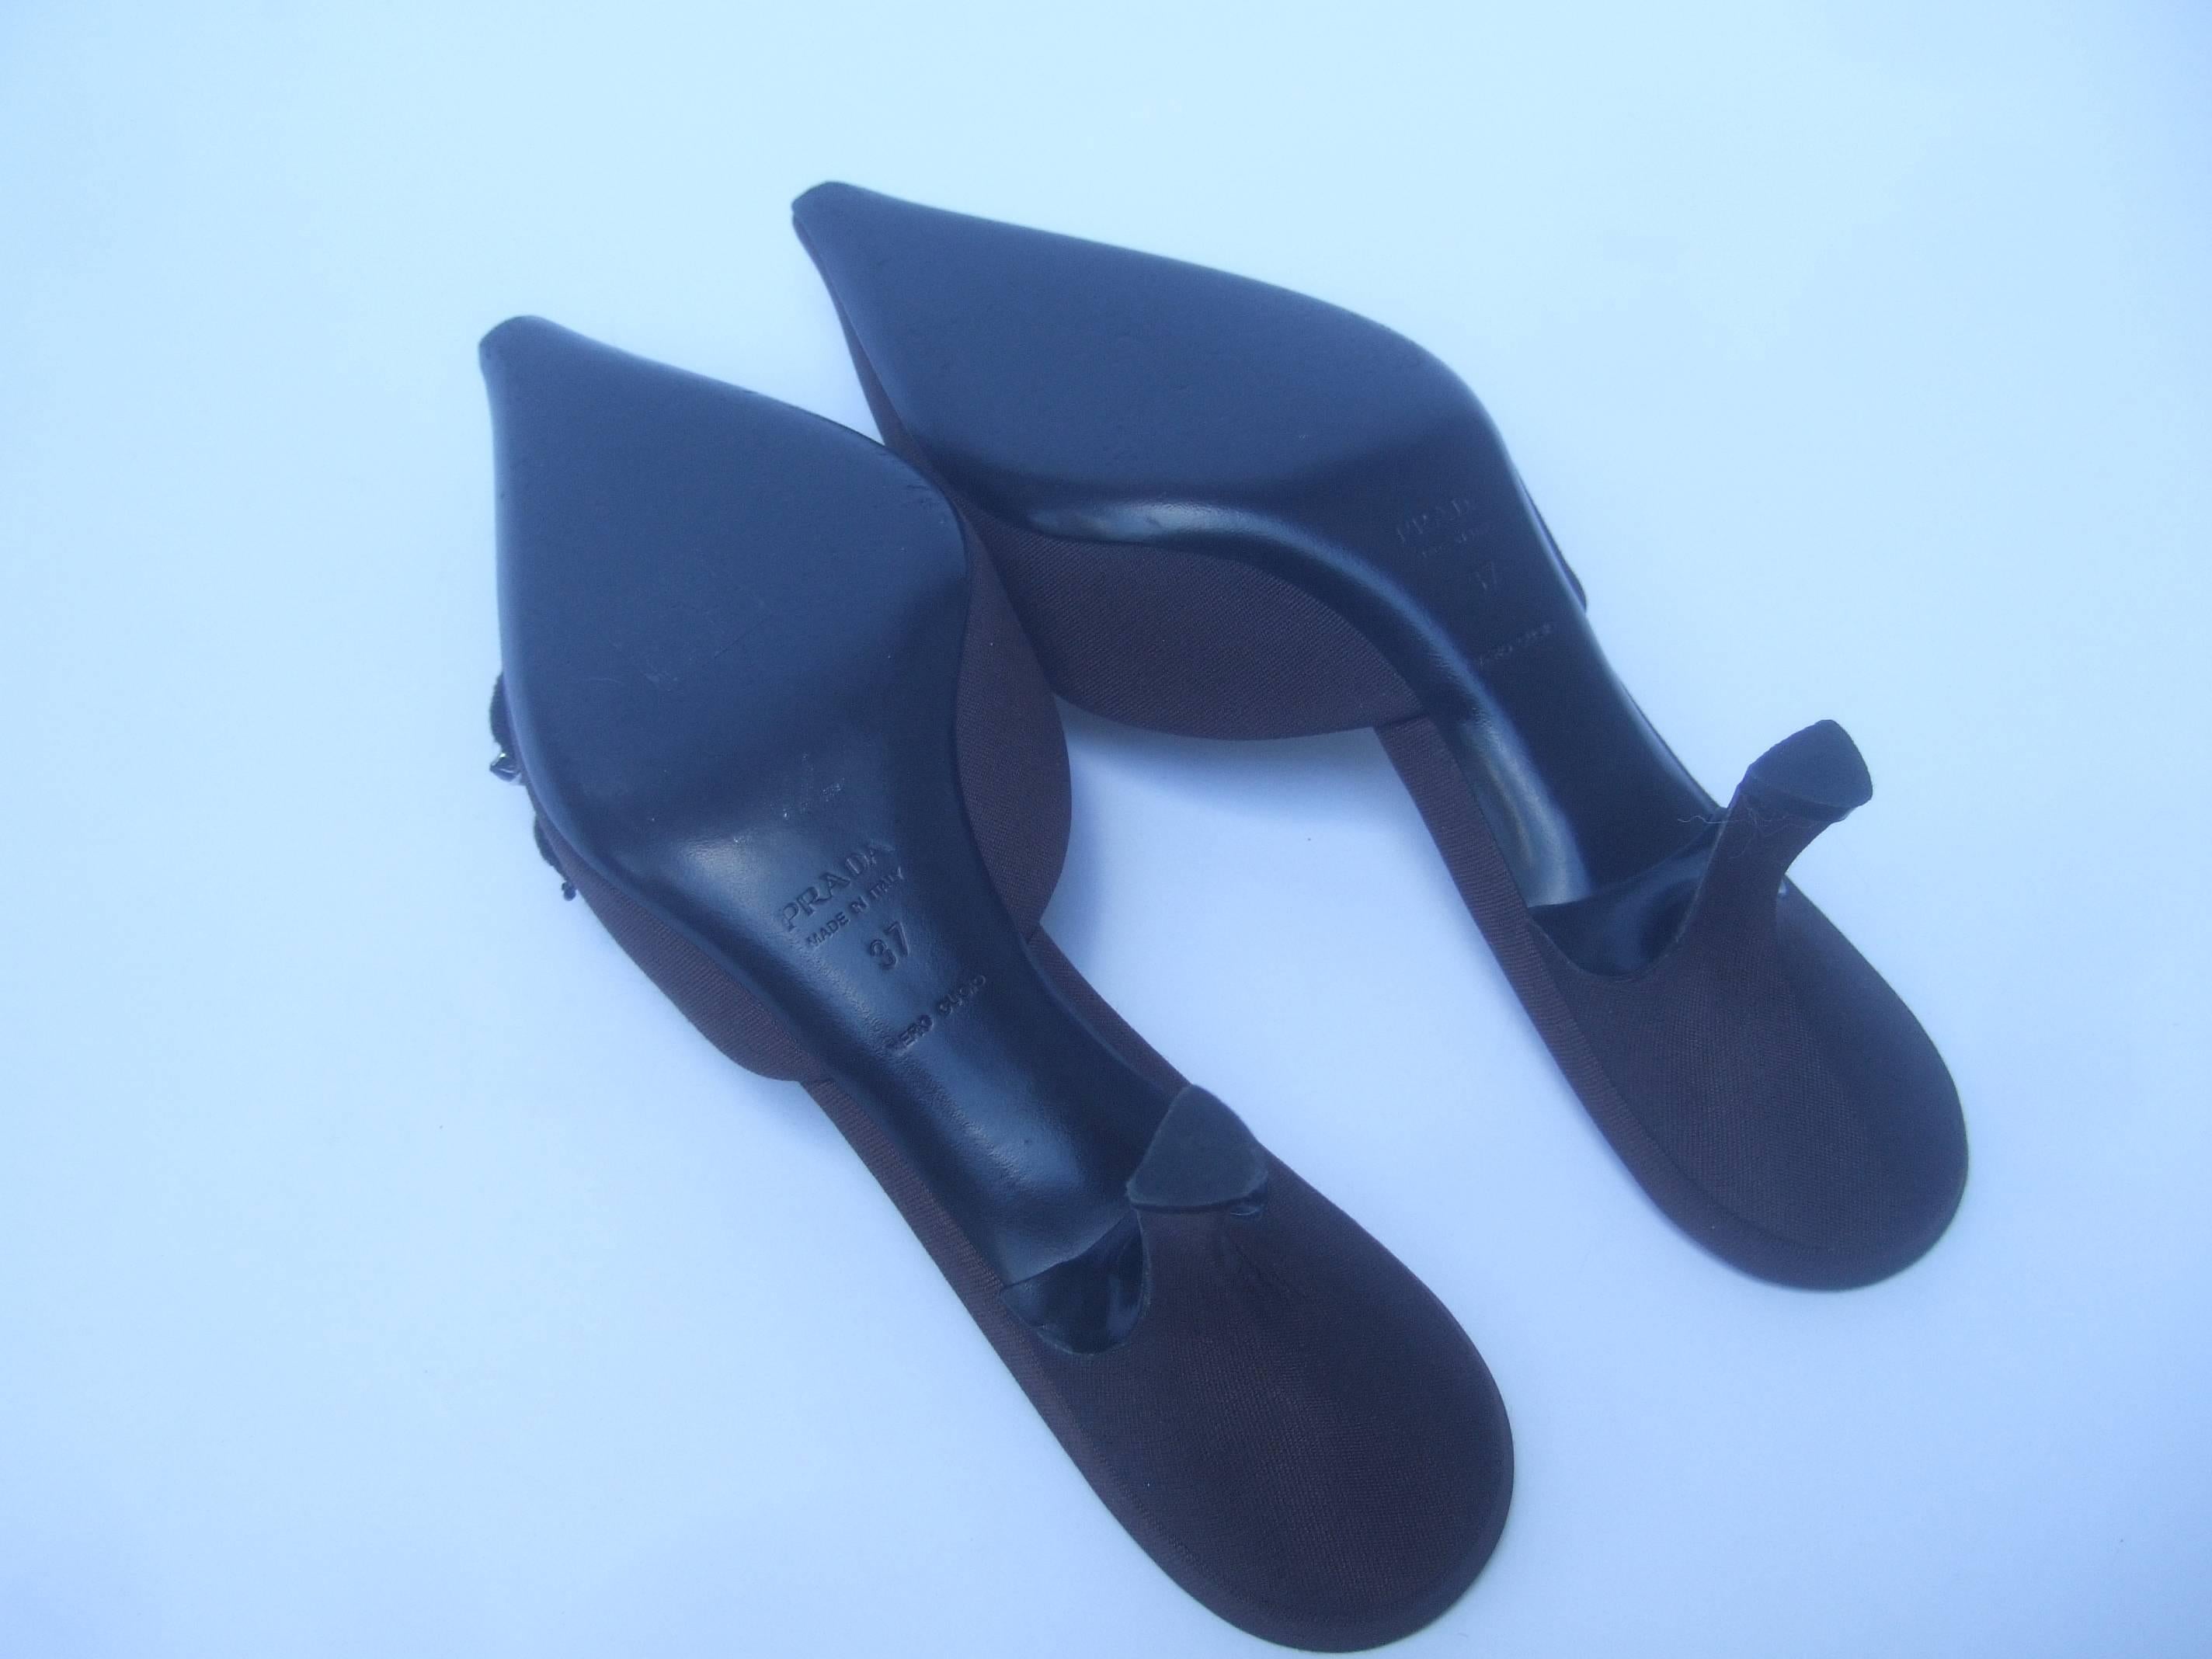 Prada Italy Chocolate Brown Jeweled Satin Mules in Box Size 37  For Sale 2